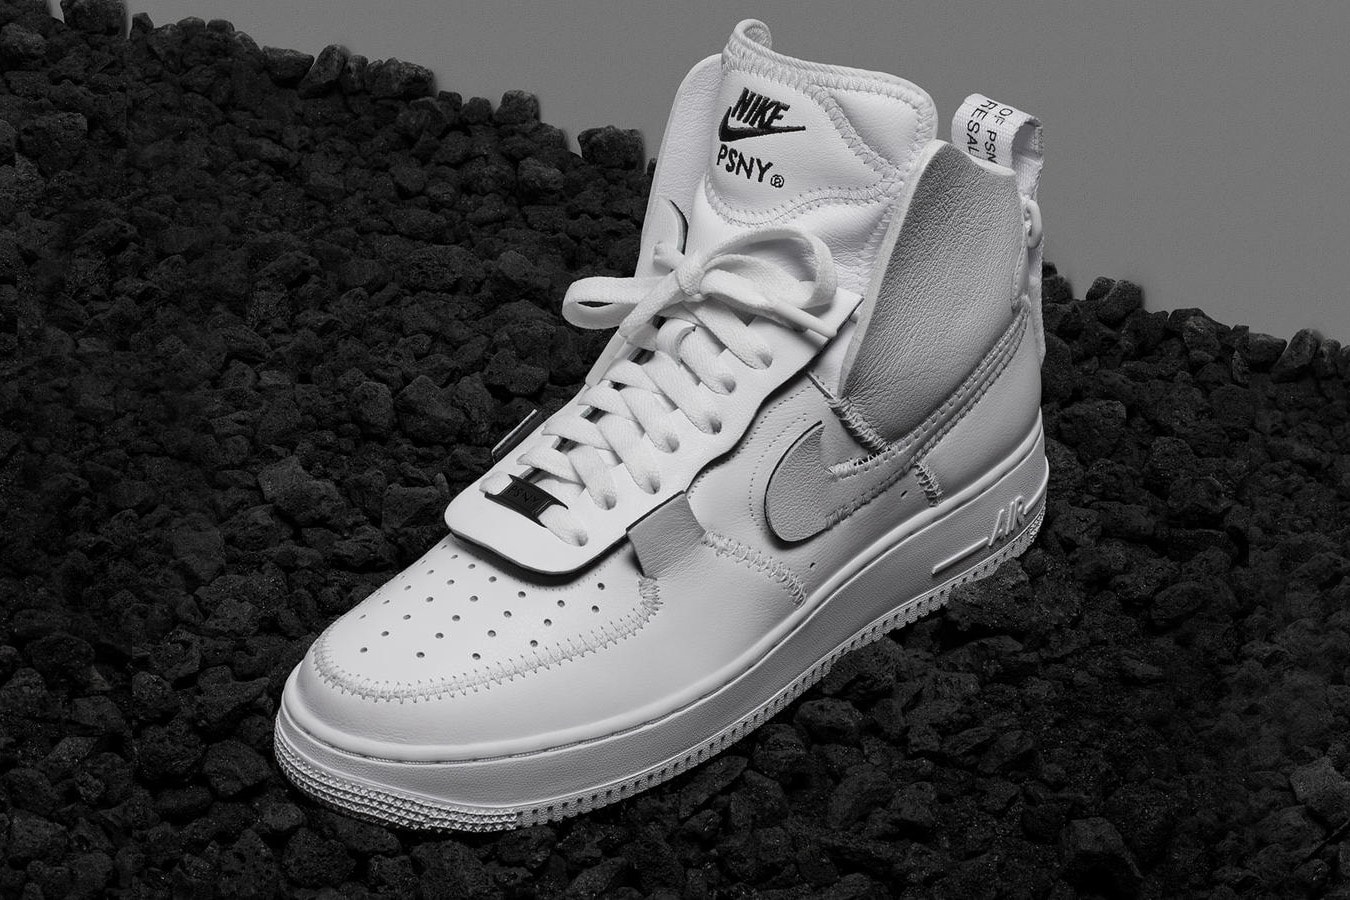 Publyc School NYC Nike Air Force 1 Collaboration Grey Black White Release Date